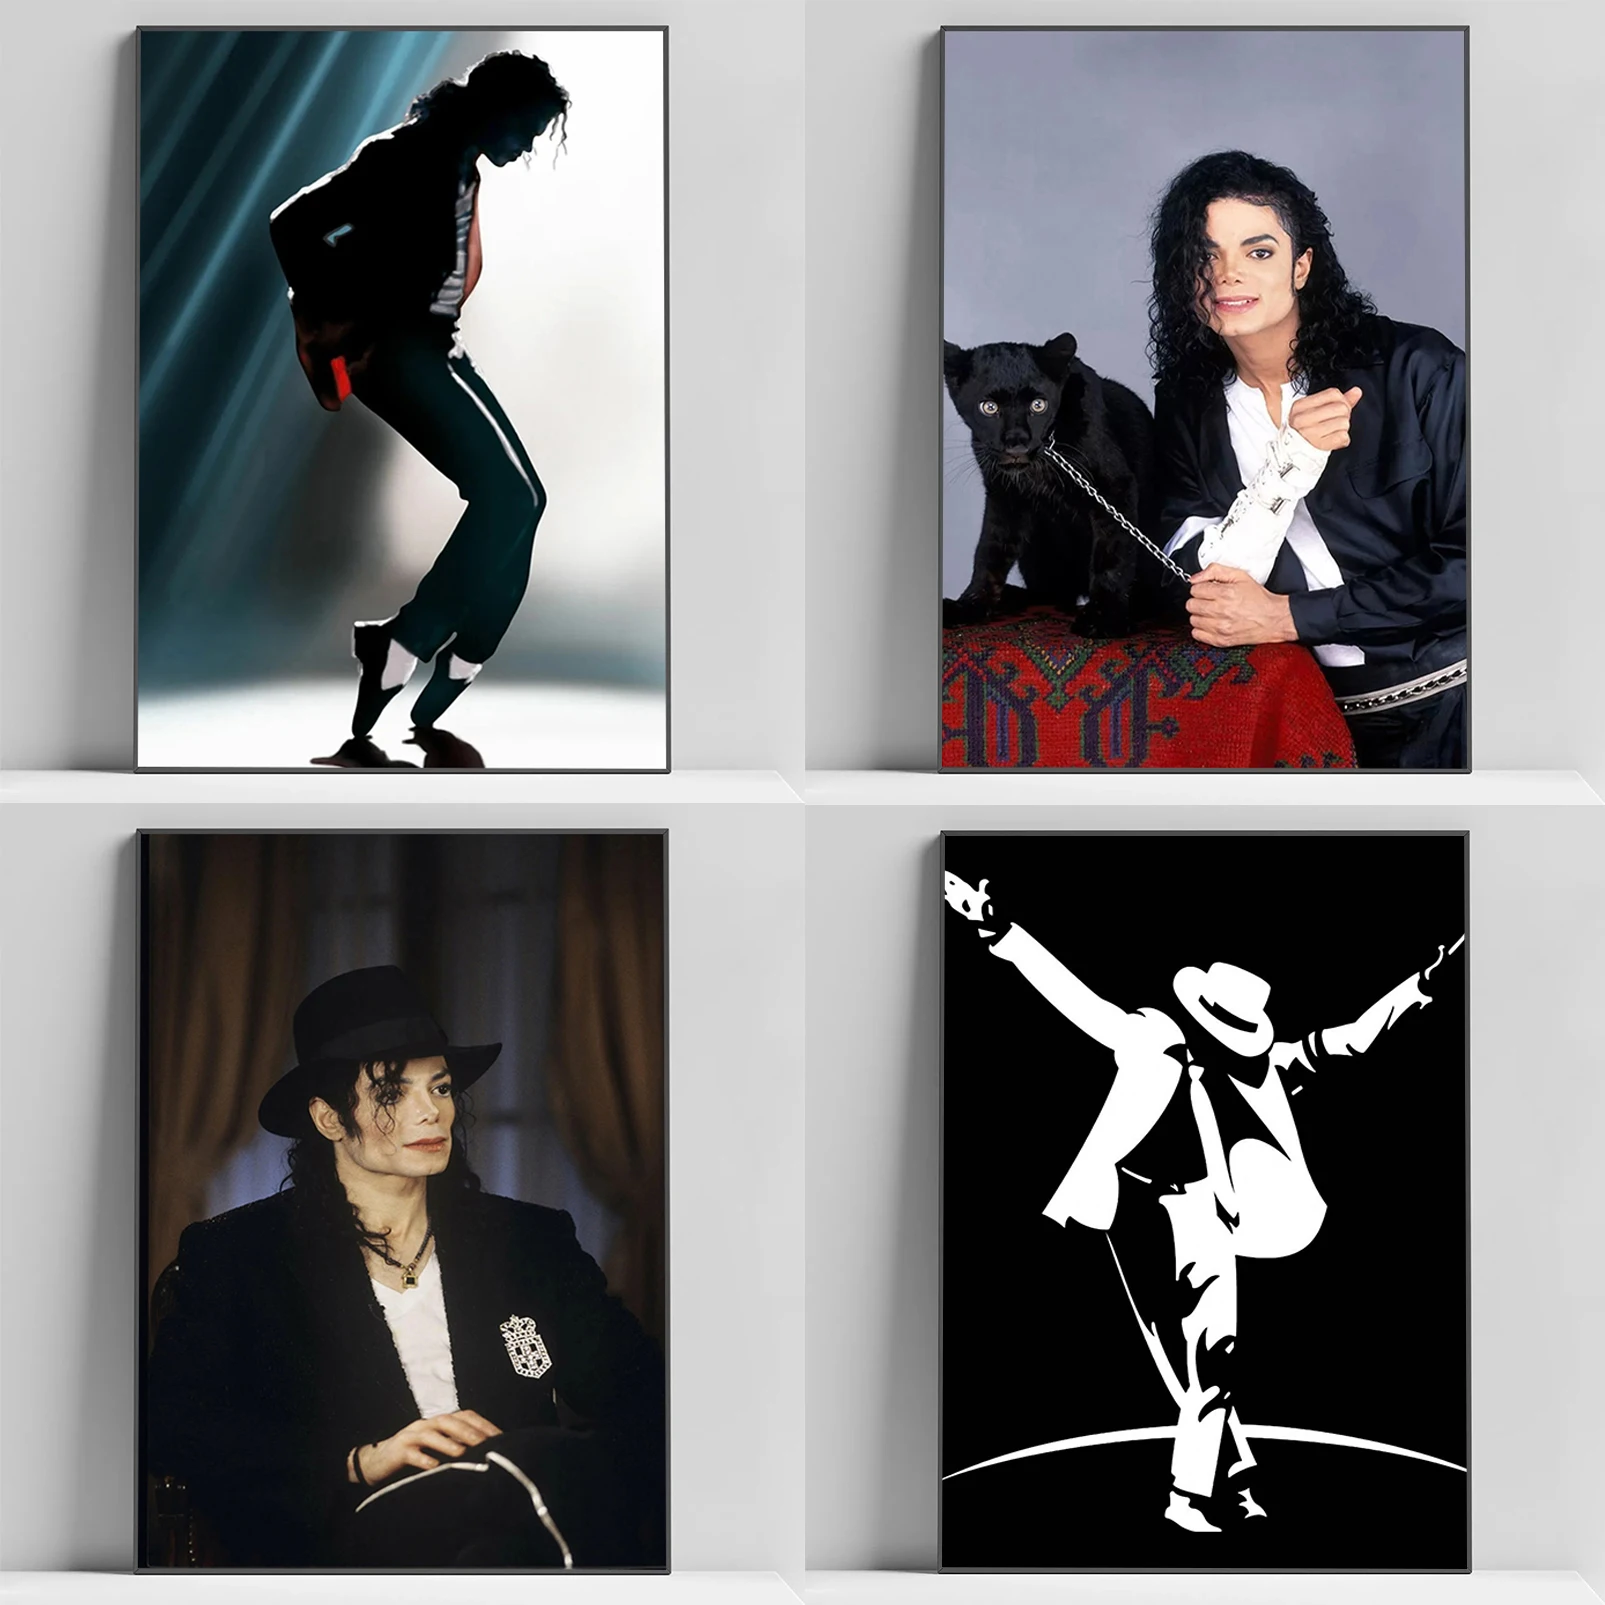 

Famous Singer Michael Jackson Poster Decoration Pictures Room Wall Art Painting on Canvas Decorative Paintings Home Decor Decor